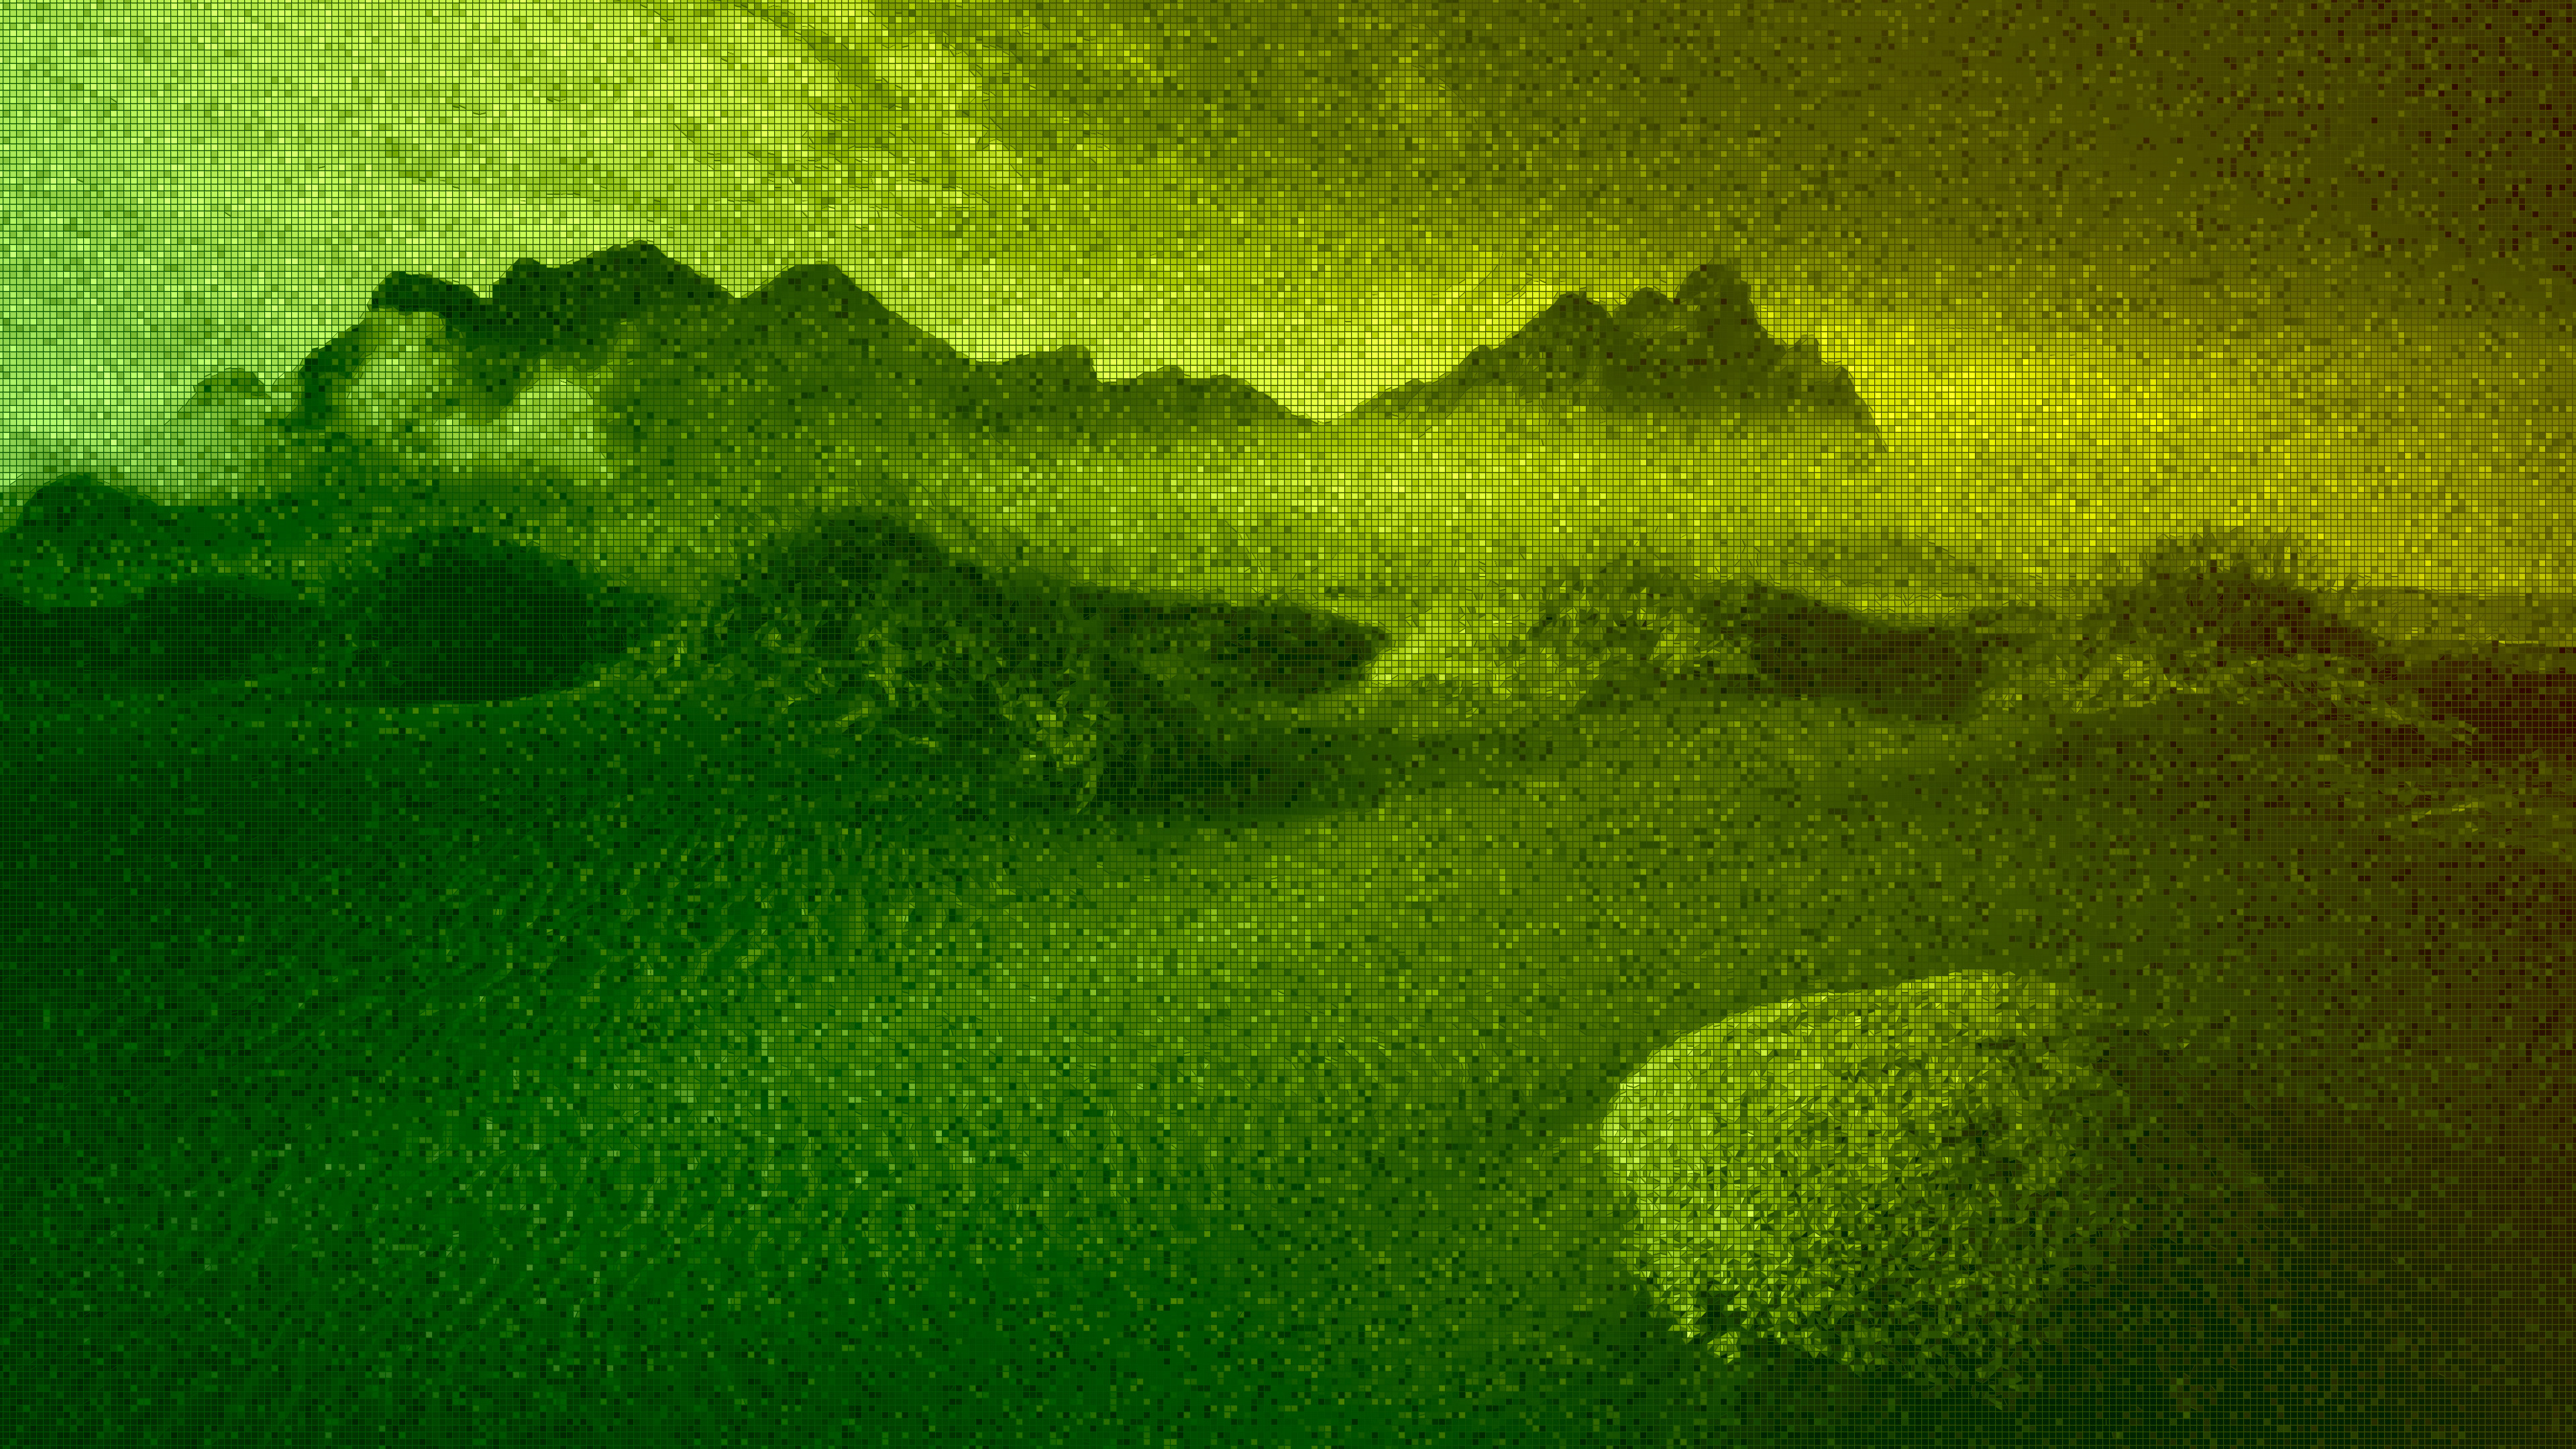 Abstract Landscape Pixelated Yellow Green 3840x2160